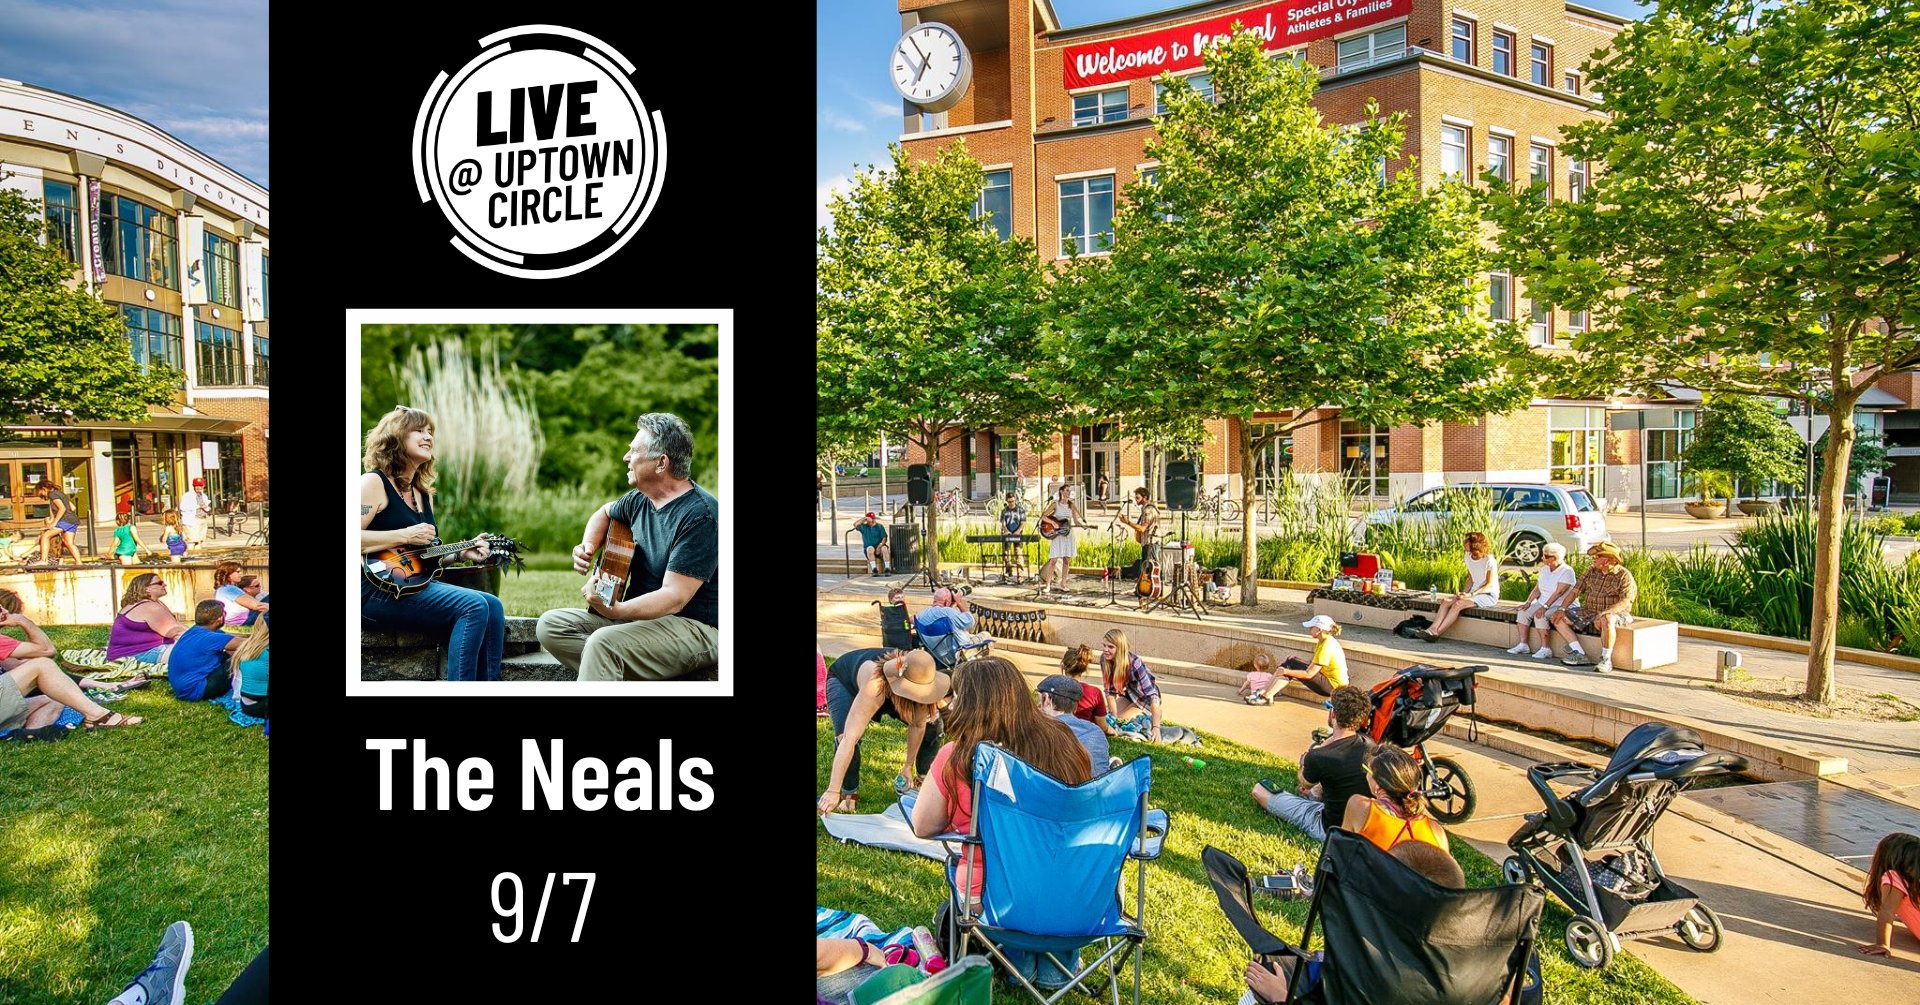 Normal LIVE presents The Neals @ Uptown Circle